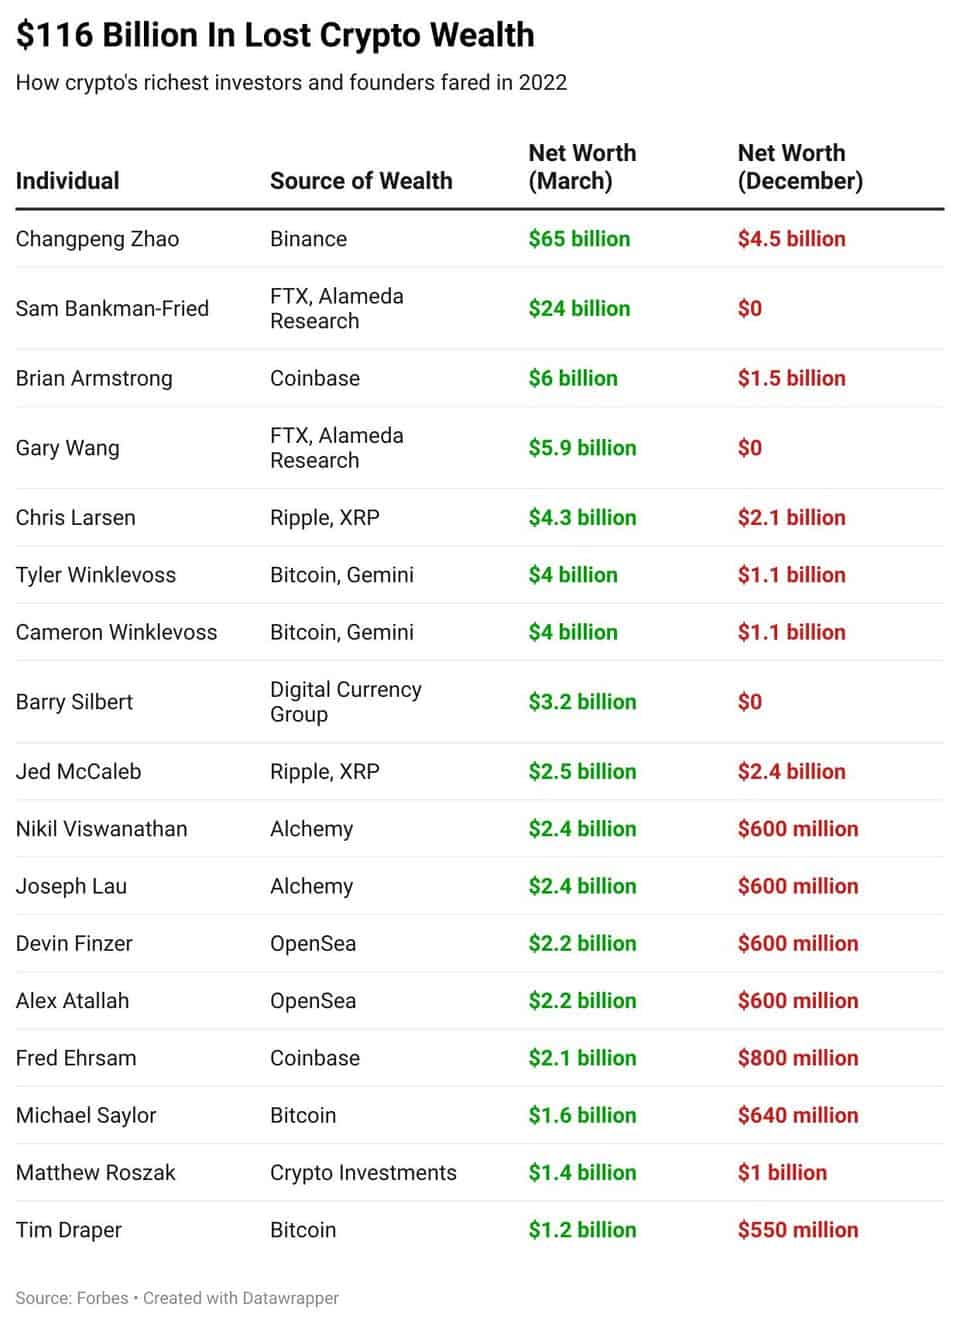 Crypto Investors and Founders Wealth. Source: Forbes